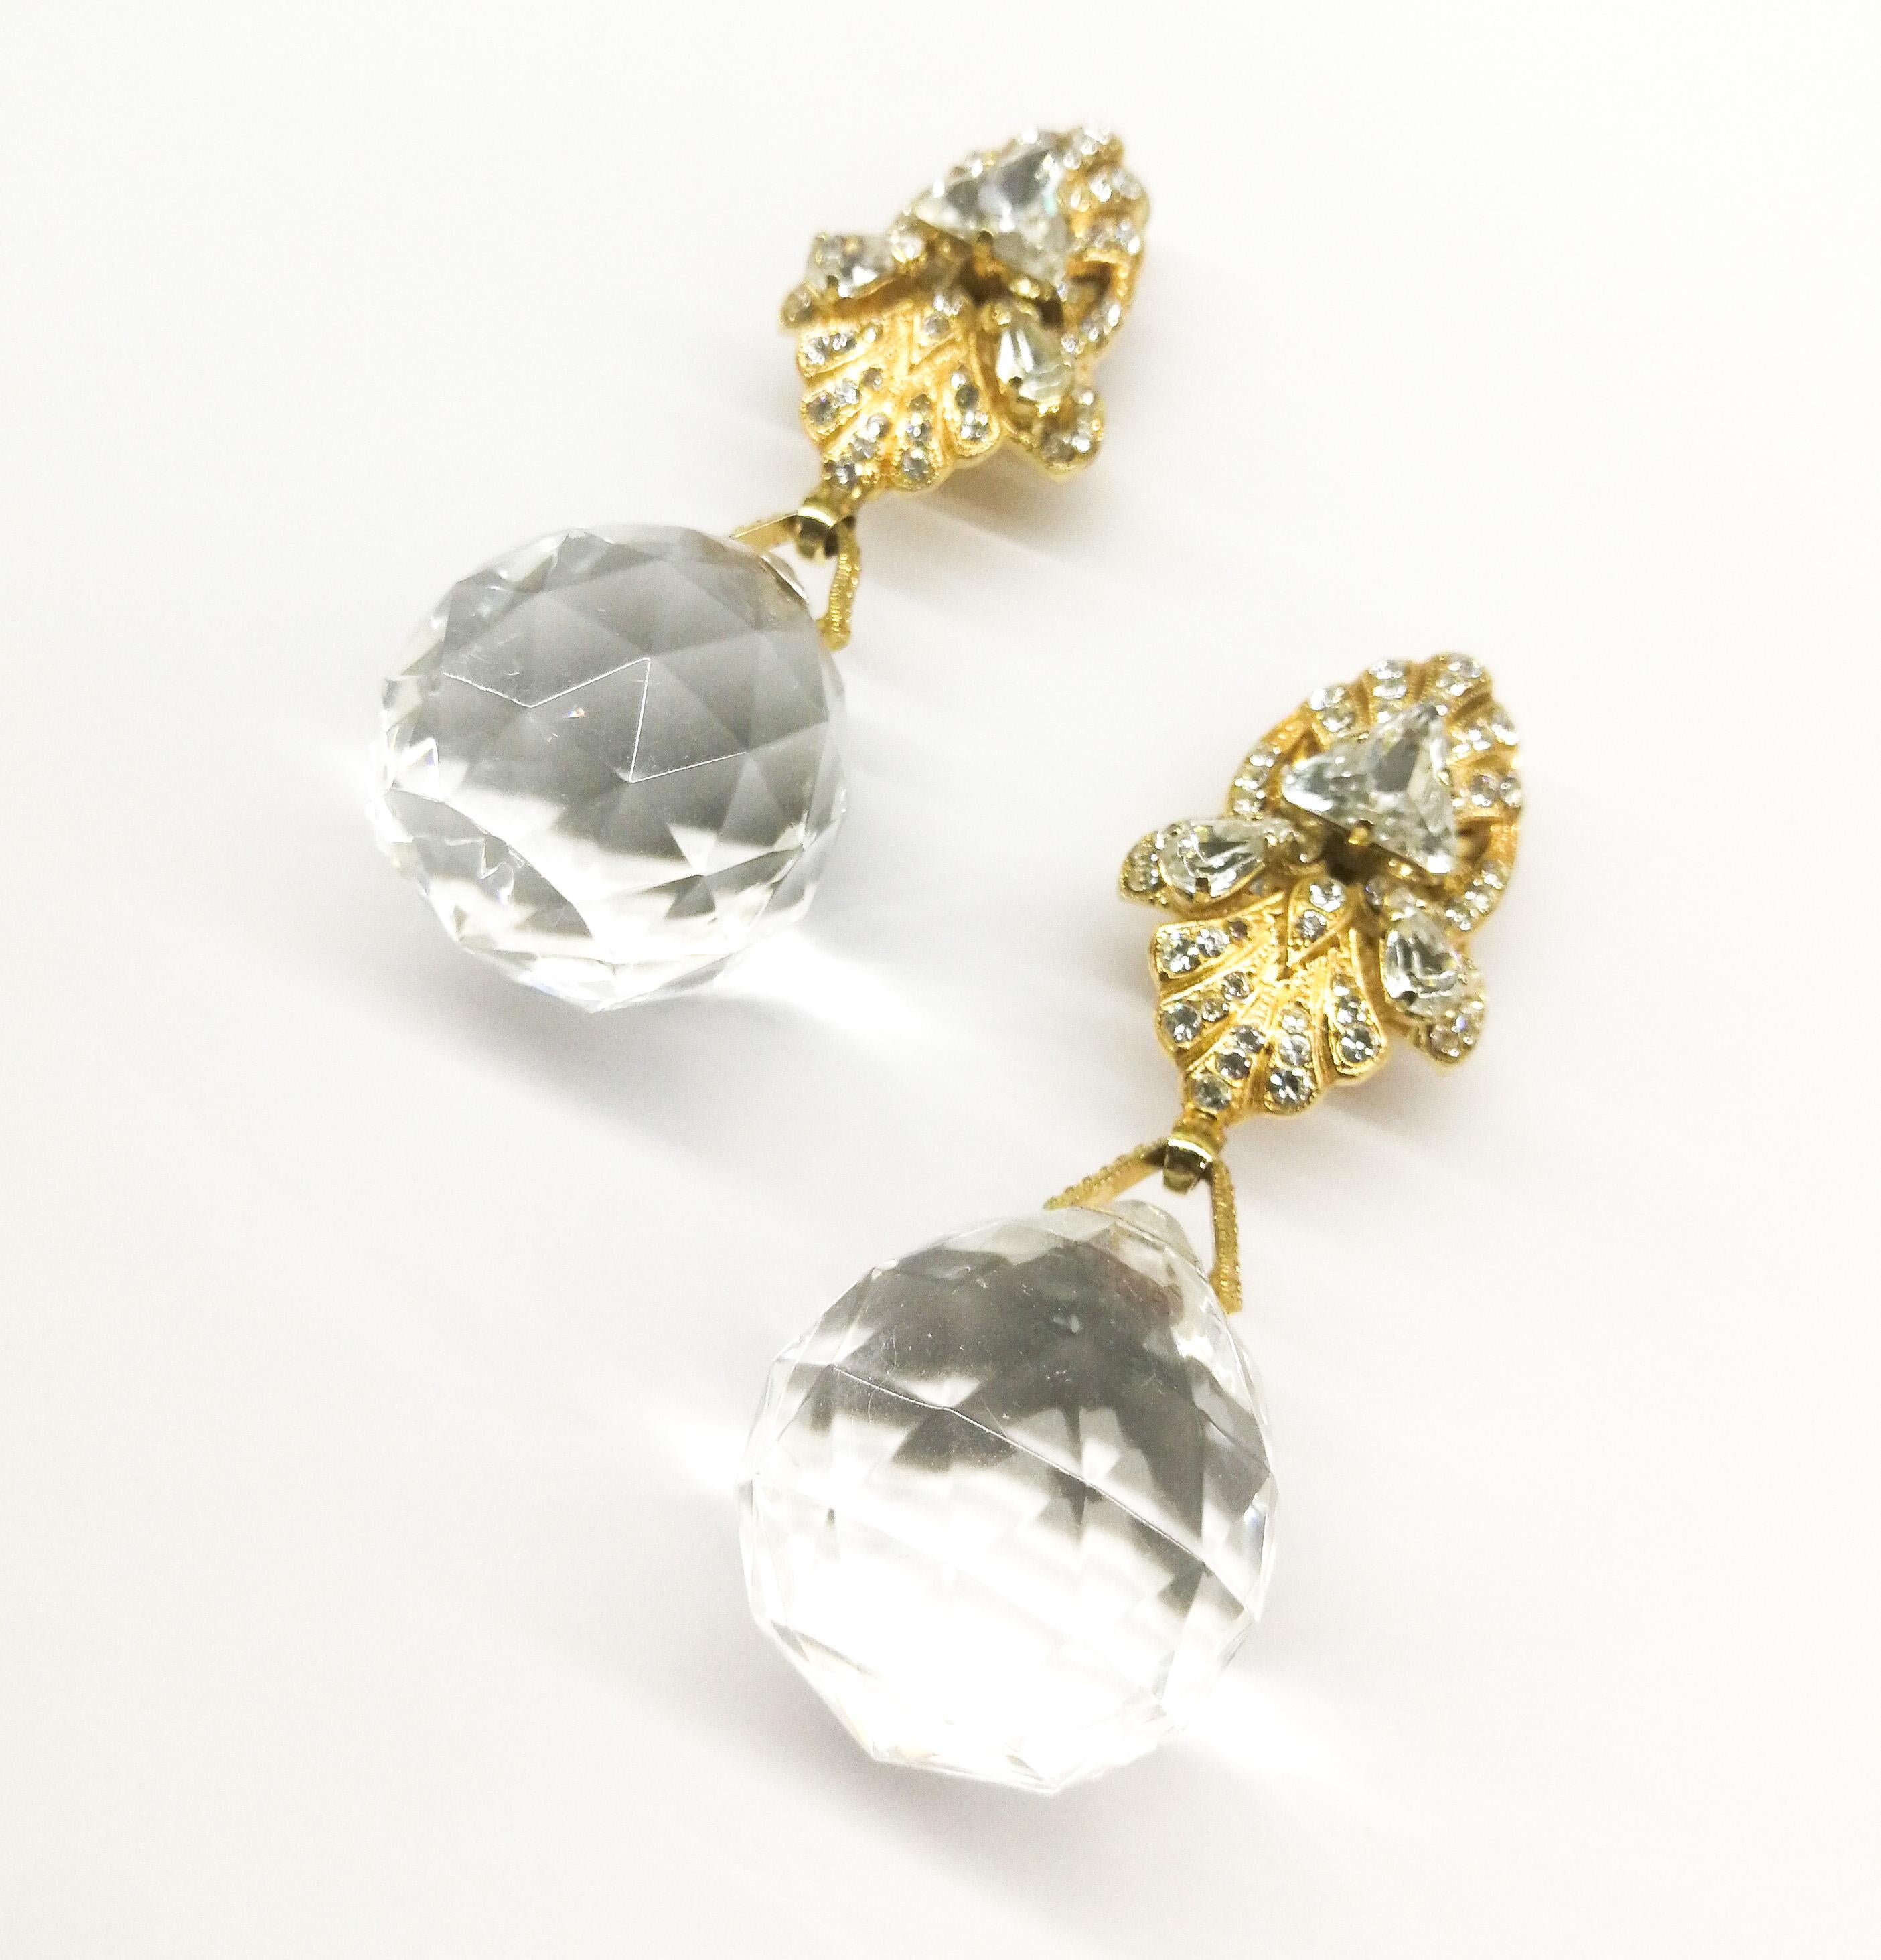 These glamorous and striking earrings are made with faceted clear resin drops, that catch and reflect the light, topped in gilt metal, set with clear pastes. If made from crystal or glass , they would be far too heavy to wear! Very typical of the